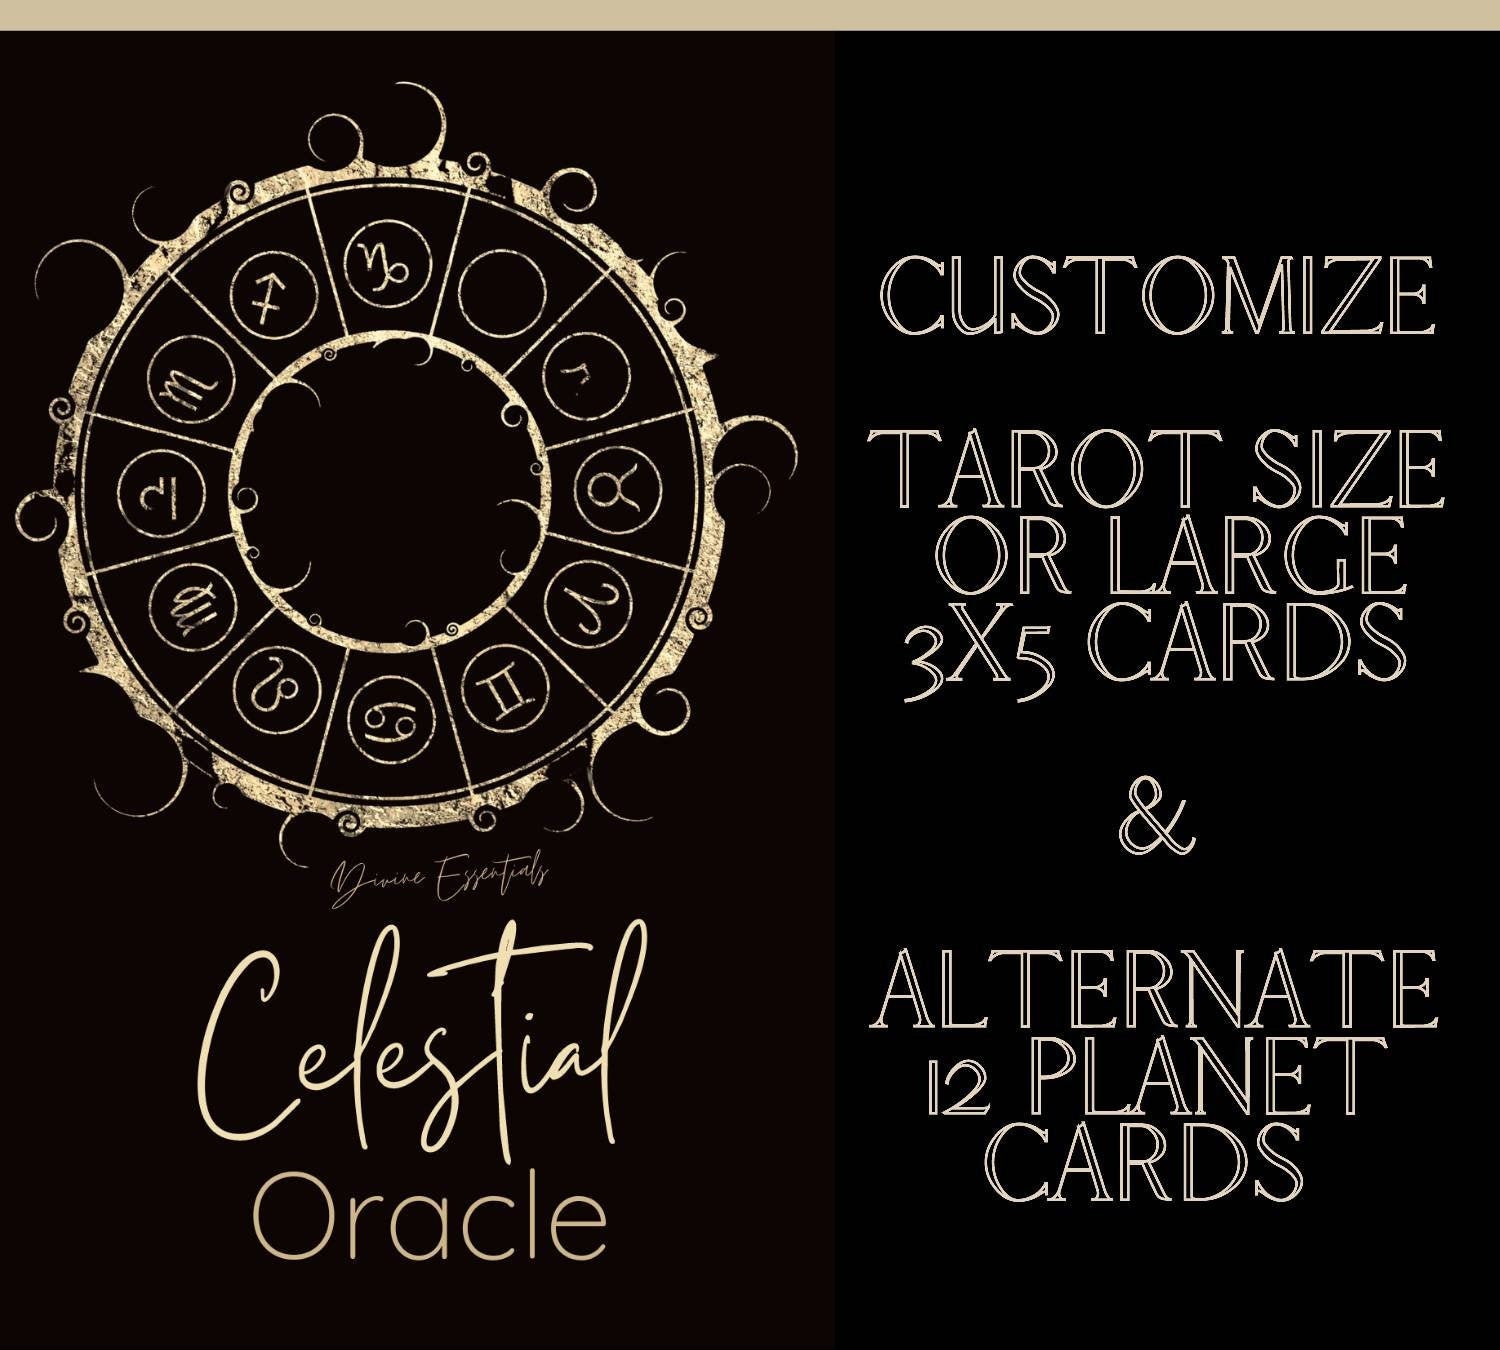 Celestial Oracle 3x5 Cards Astrology Oracle Deck Astrology | Etsy